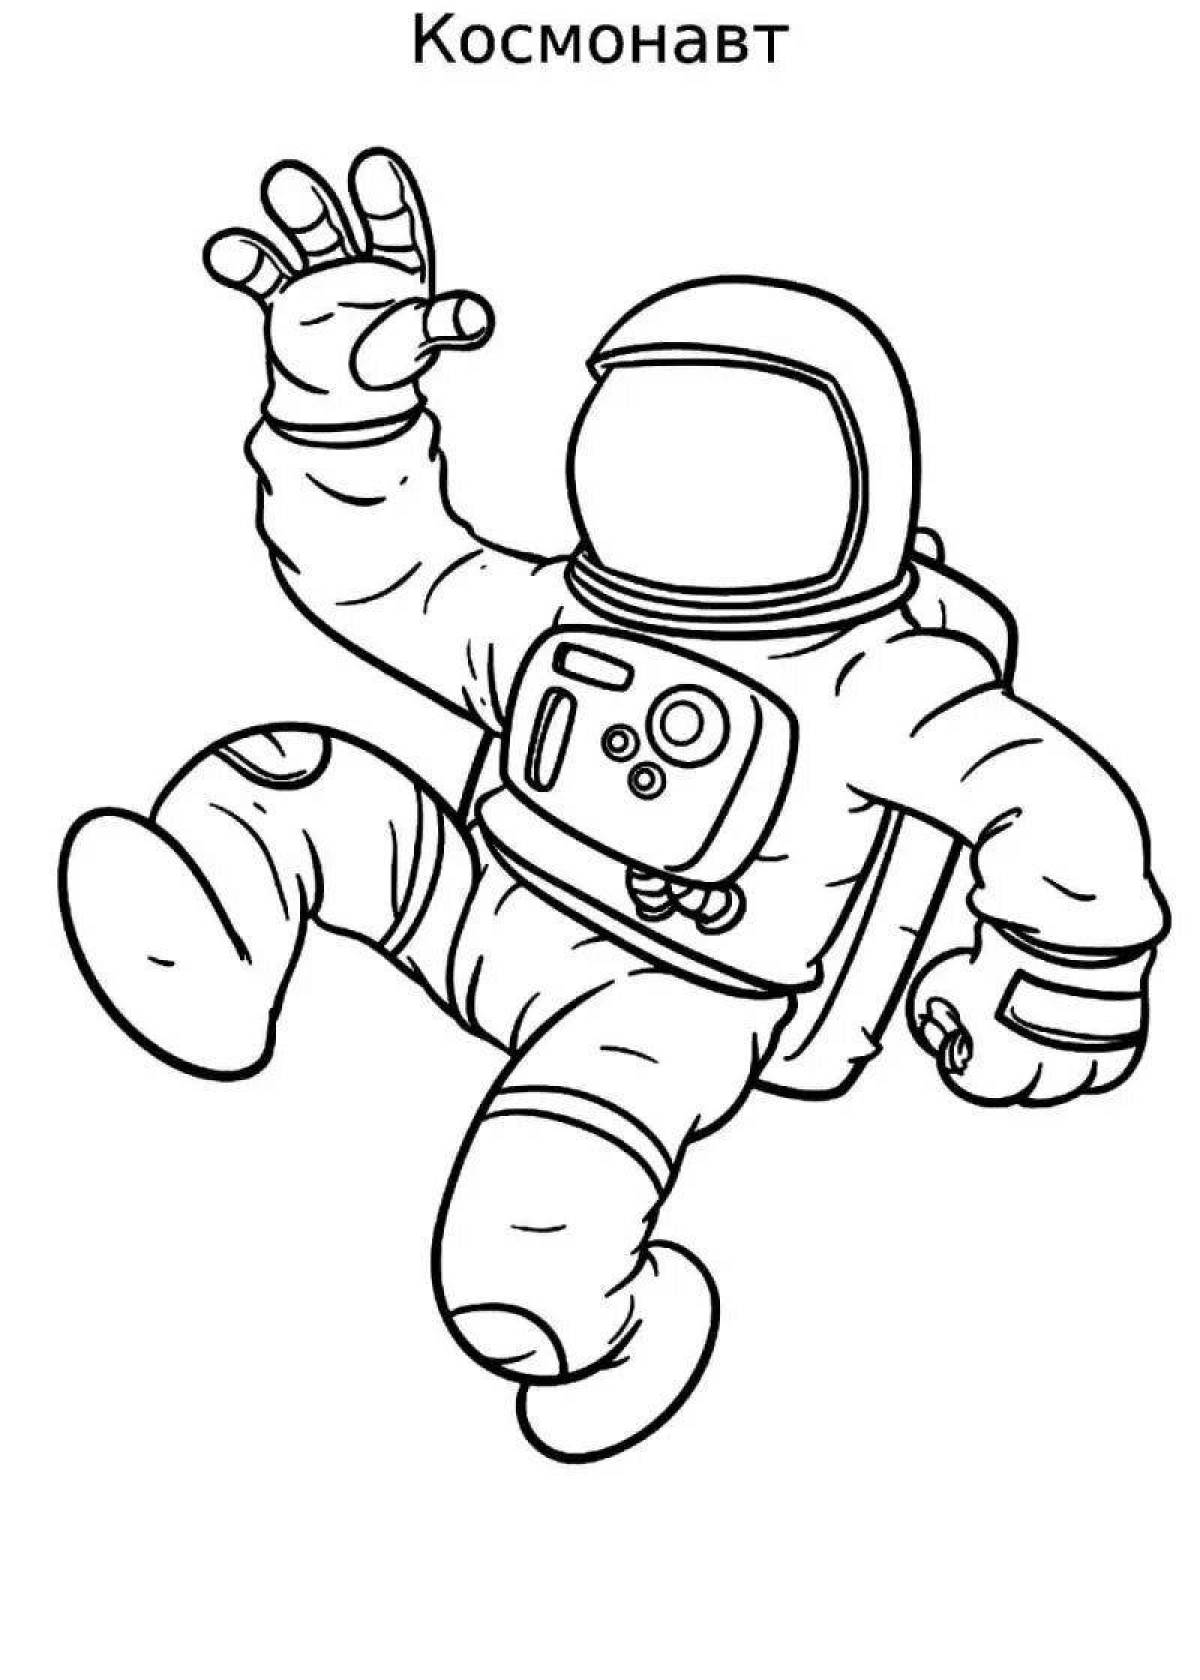 Glorious astronaut in space suit